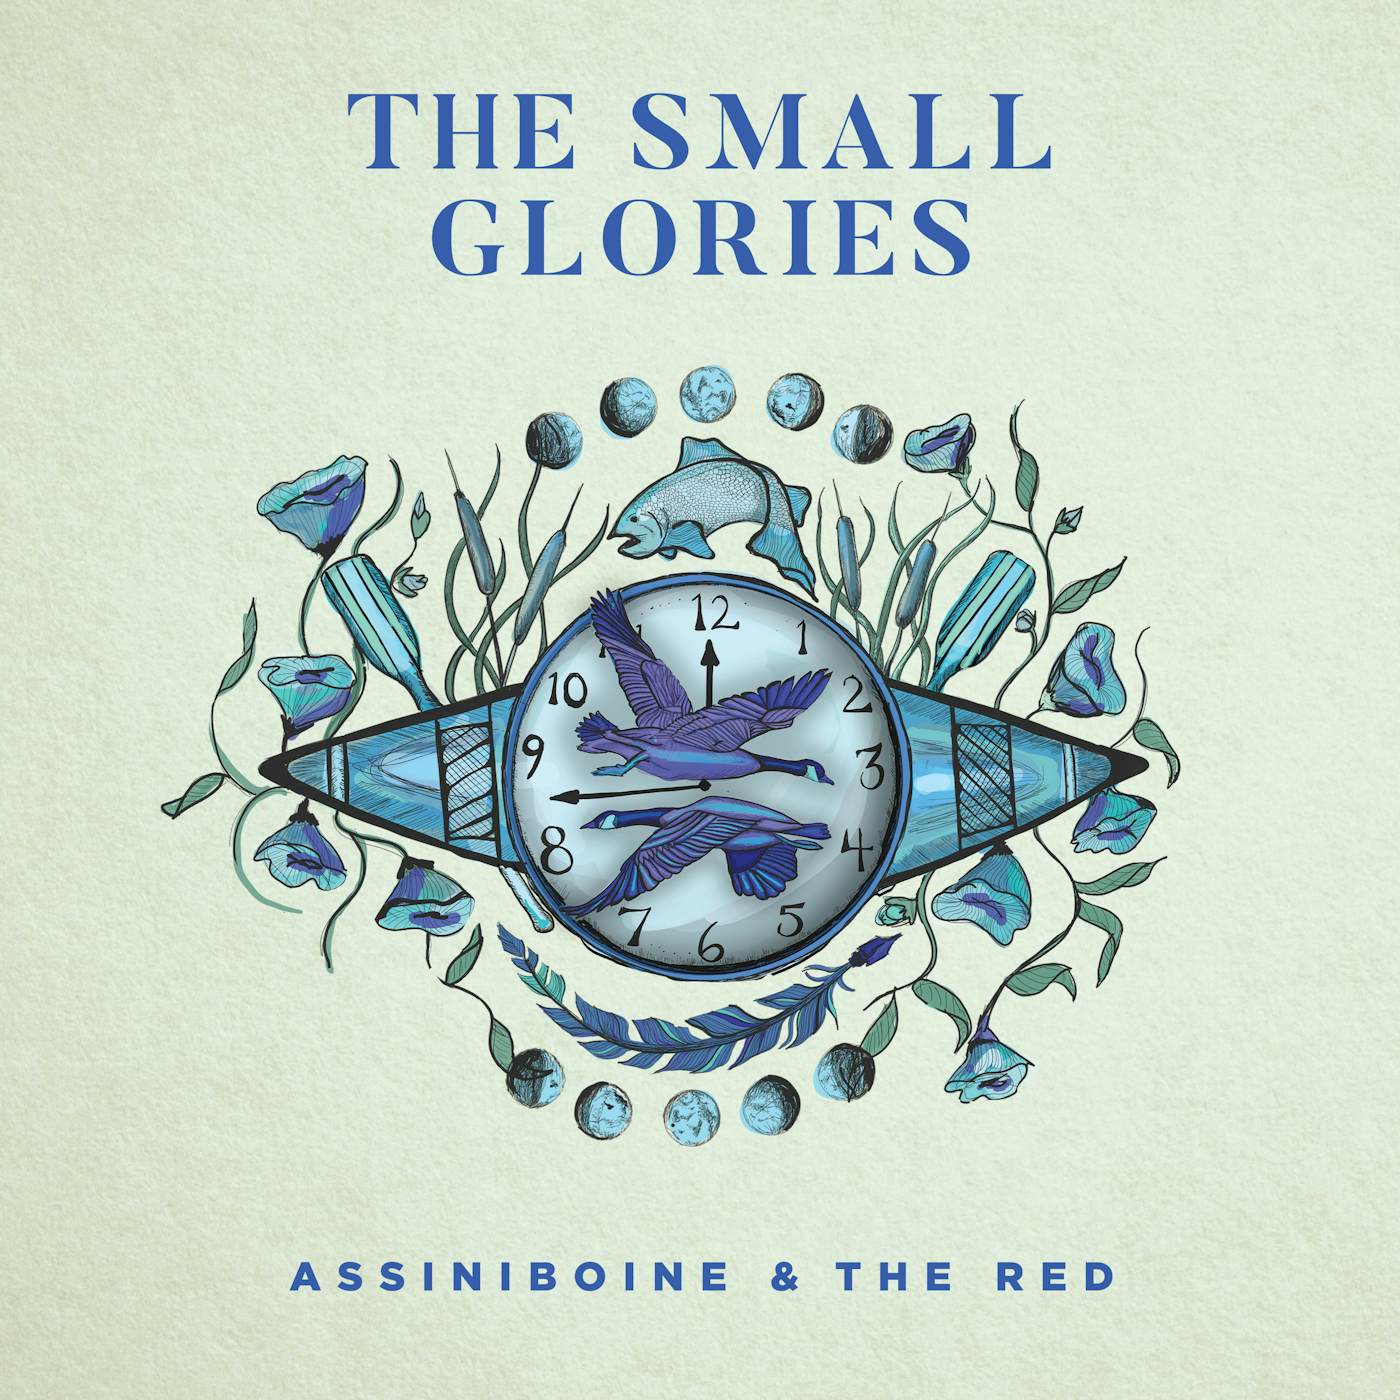 The Small Glories Assiniboine & the Red Vinyl Record